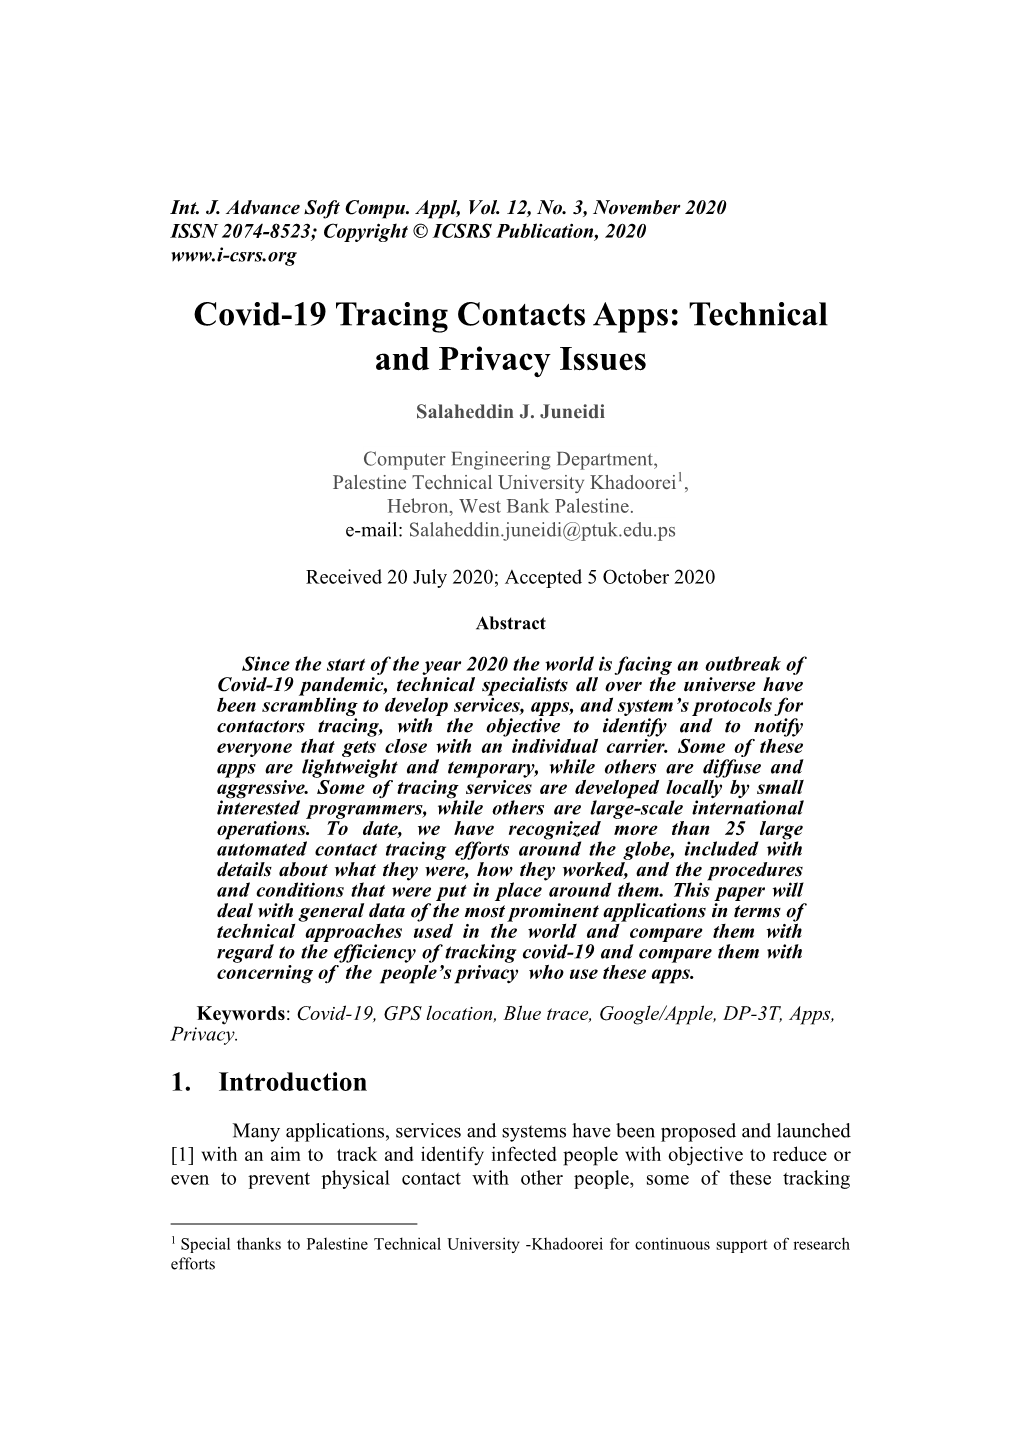 Covid-19 Tracing Contacts Apps: Technical and Privacy Issues